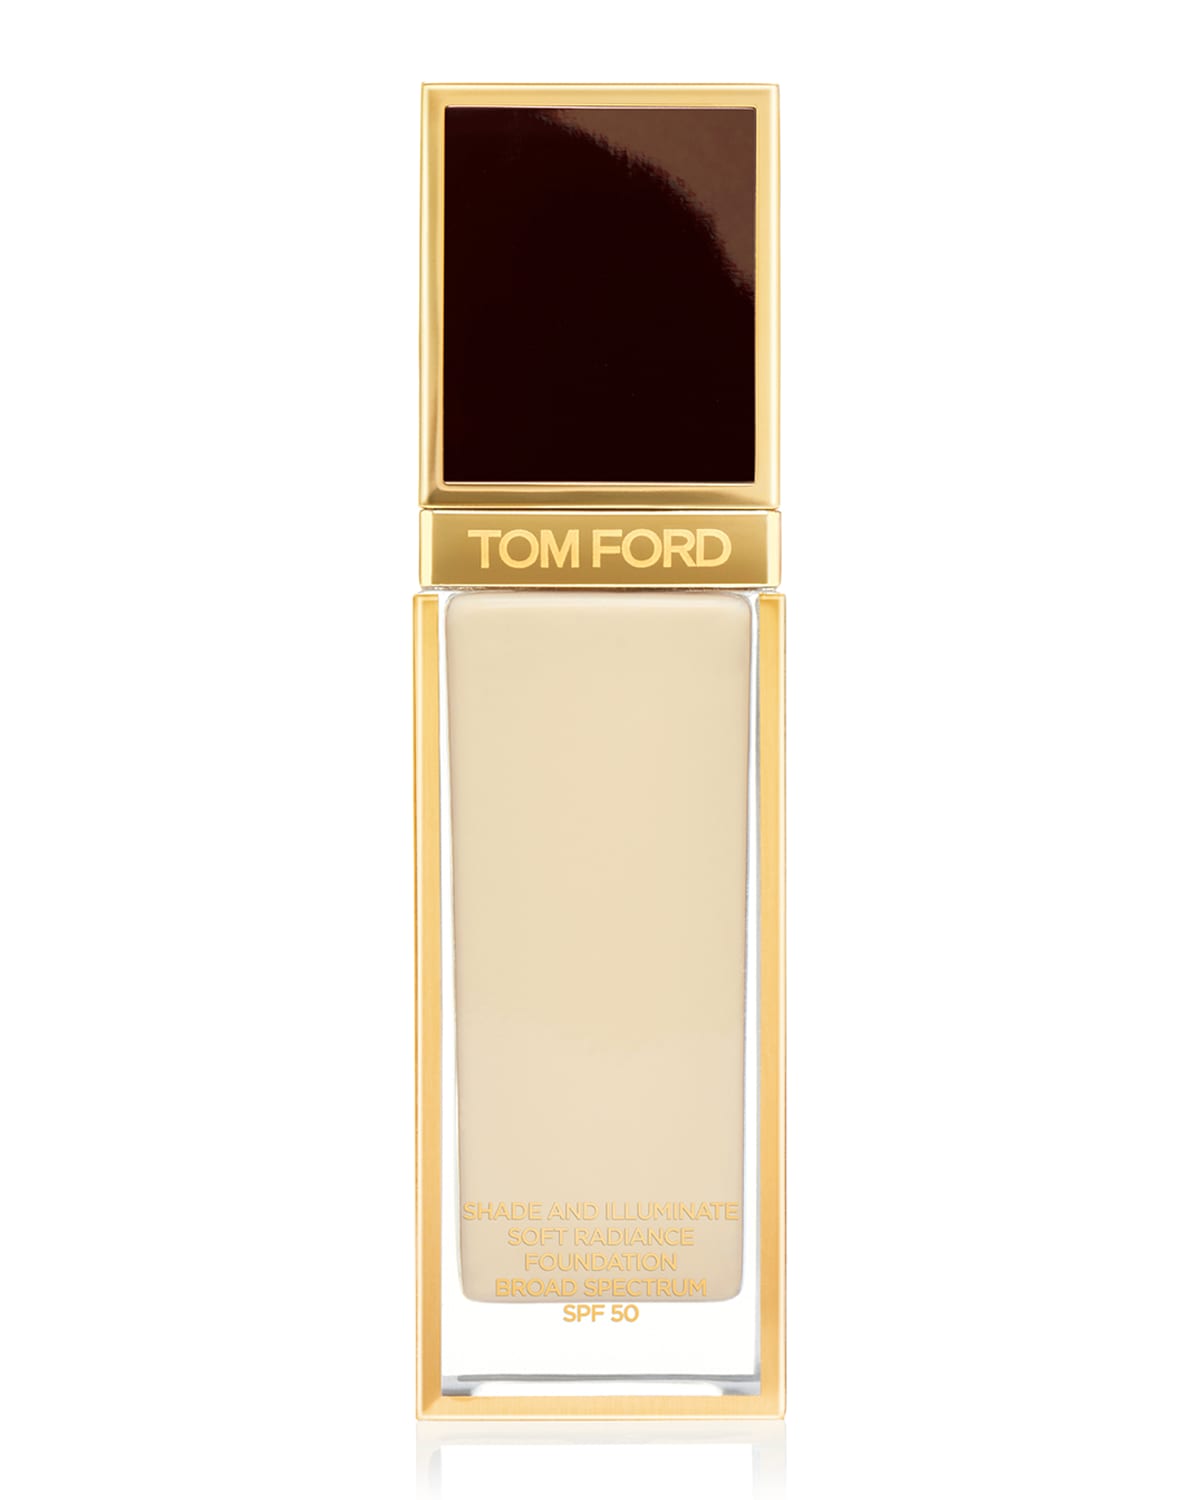 Shop Tom Ford 1 Oz. Shade And Illuminate Soft Radiance Foundation Spf 50 In 11.0 Warm Sand